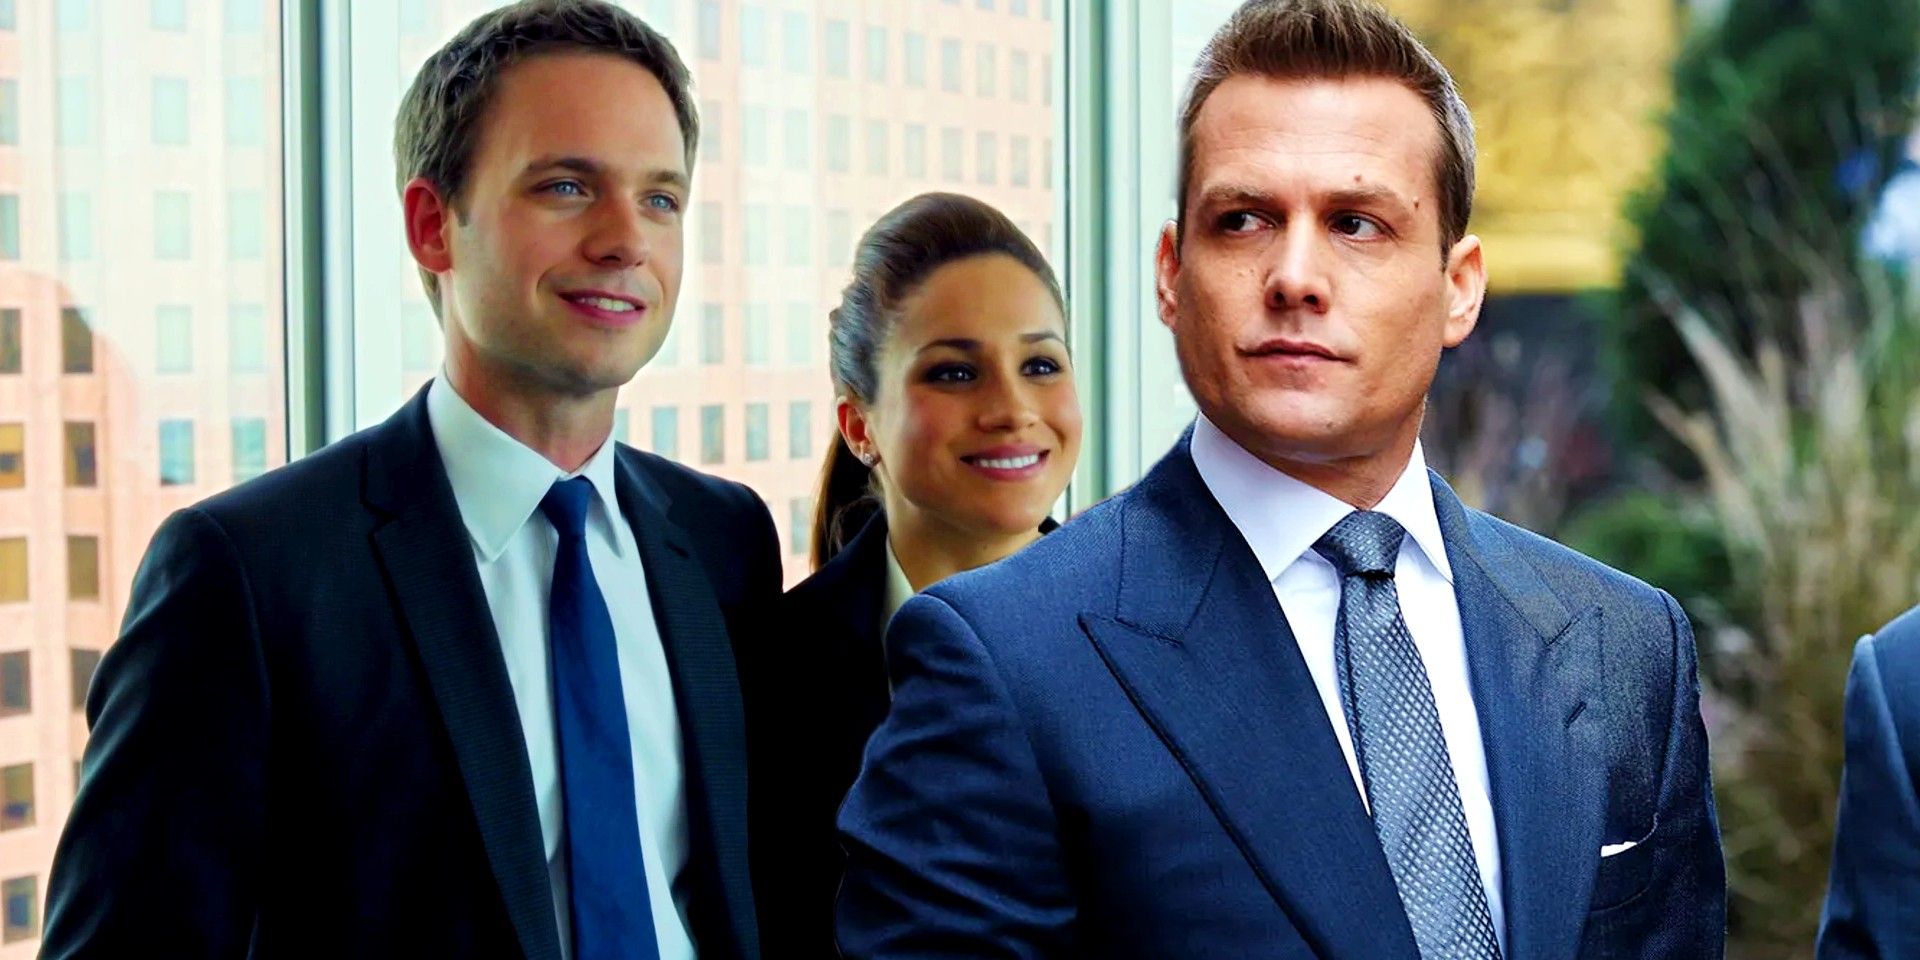 Custon image of Mike and Rachel together and Harvey looking to the side in Suits